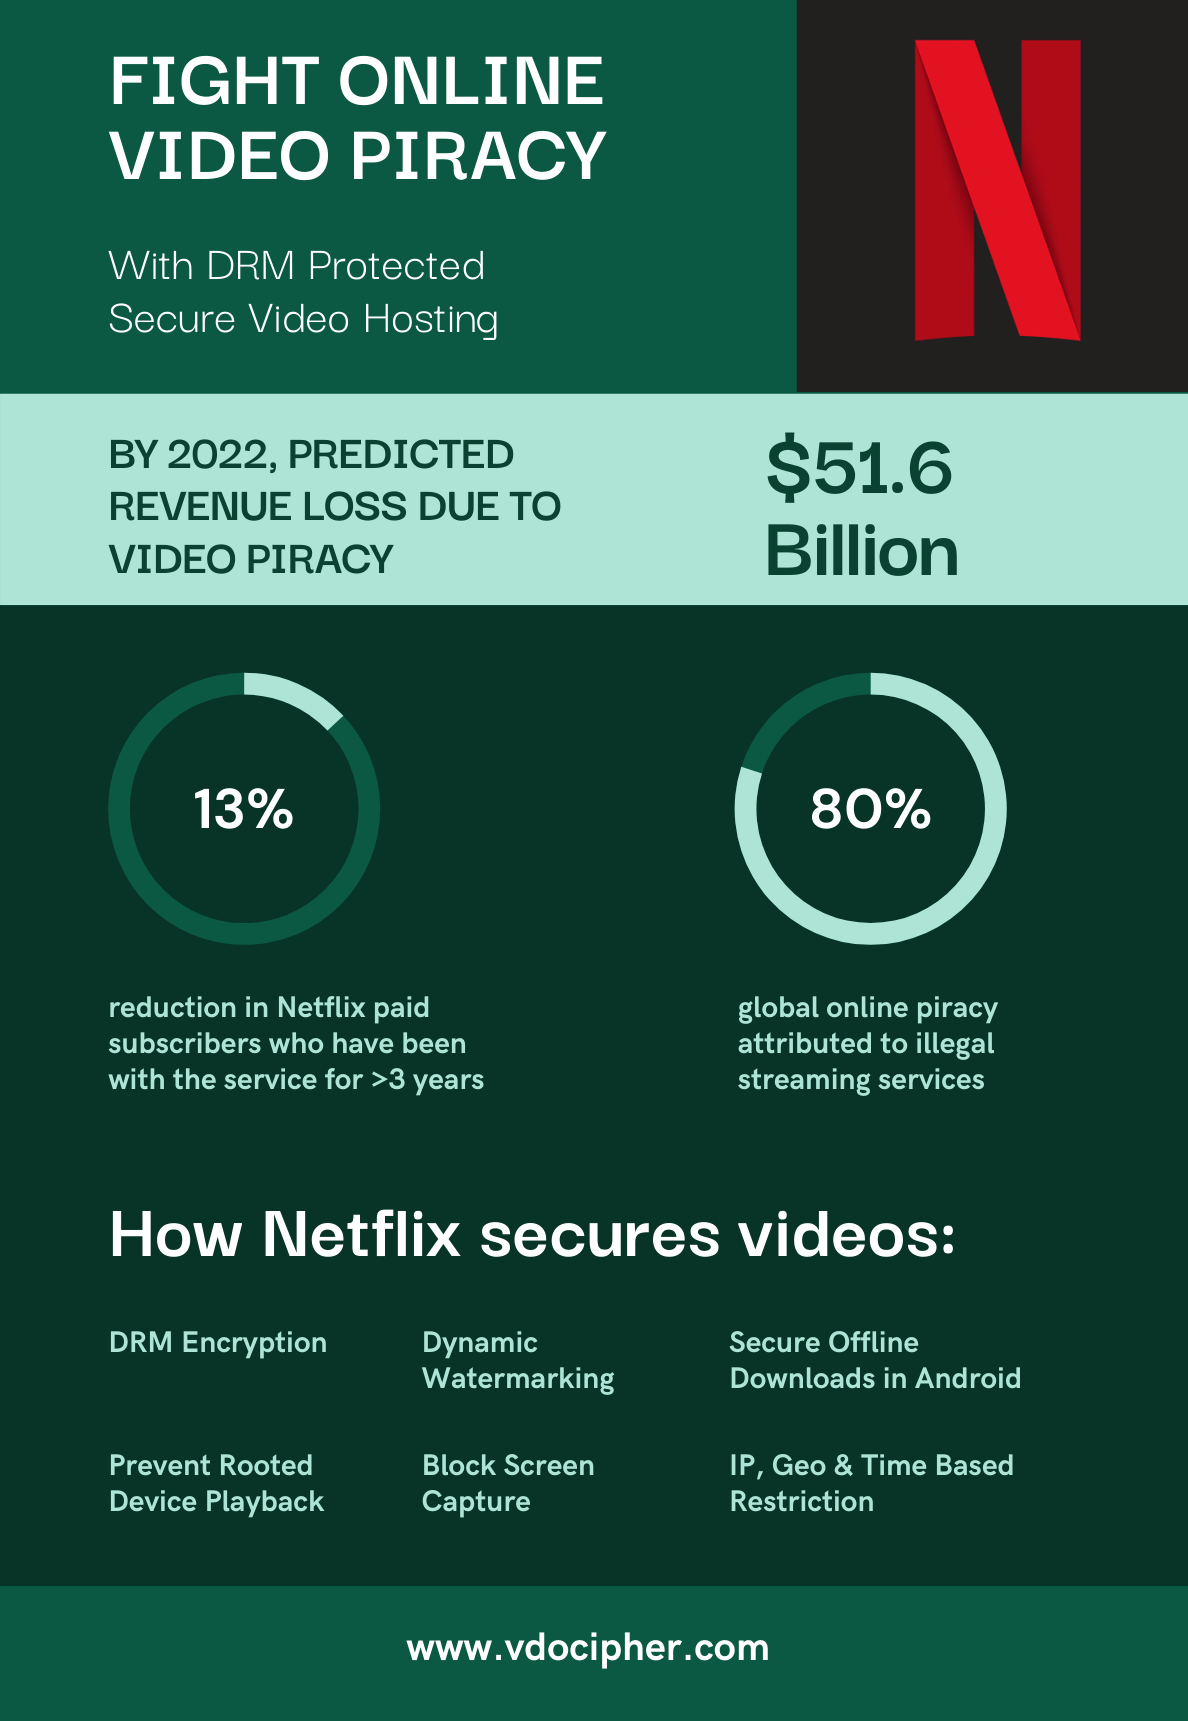 How Netflix fight video piracy using DRM protected streaming